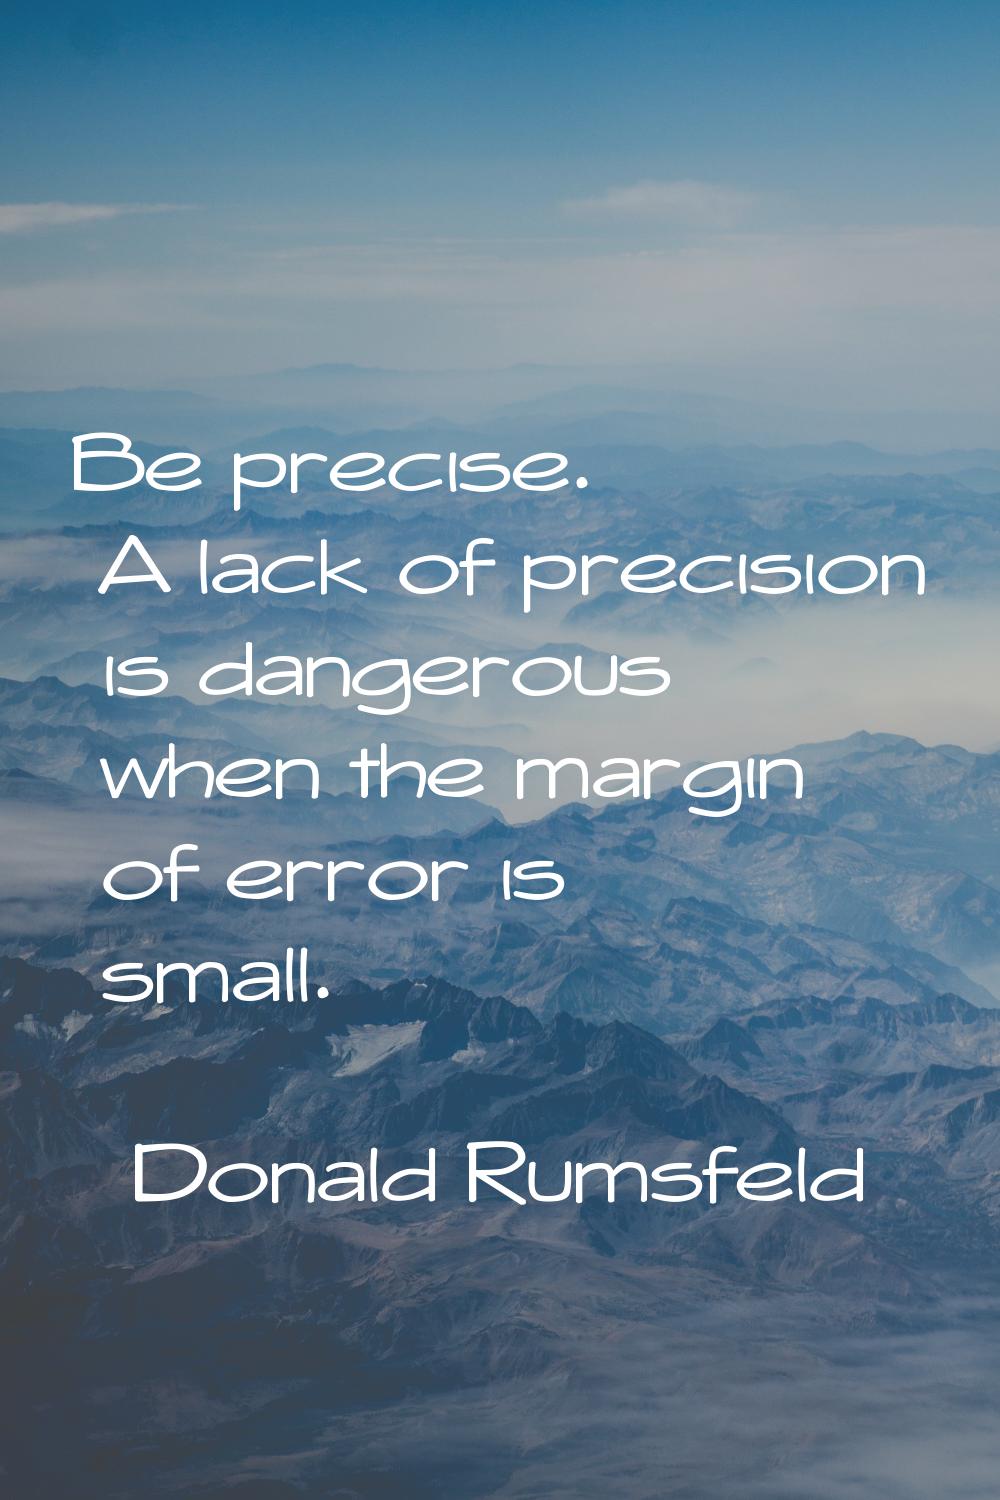 Be precise. A lack of precision is dangerous when the margin of error is small.